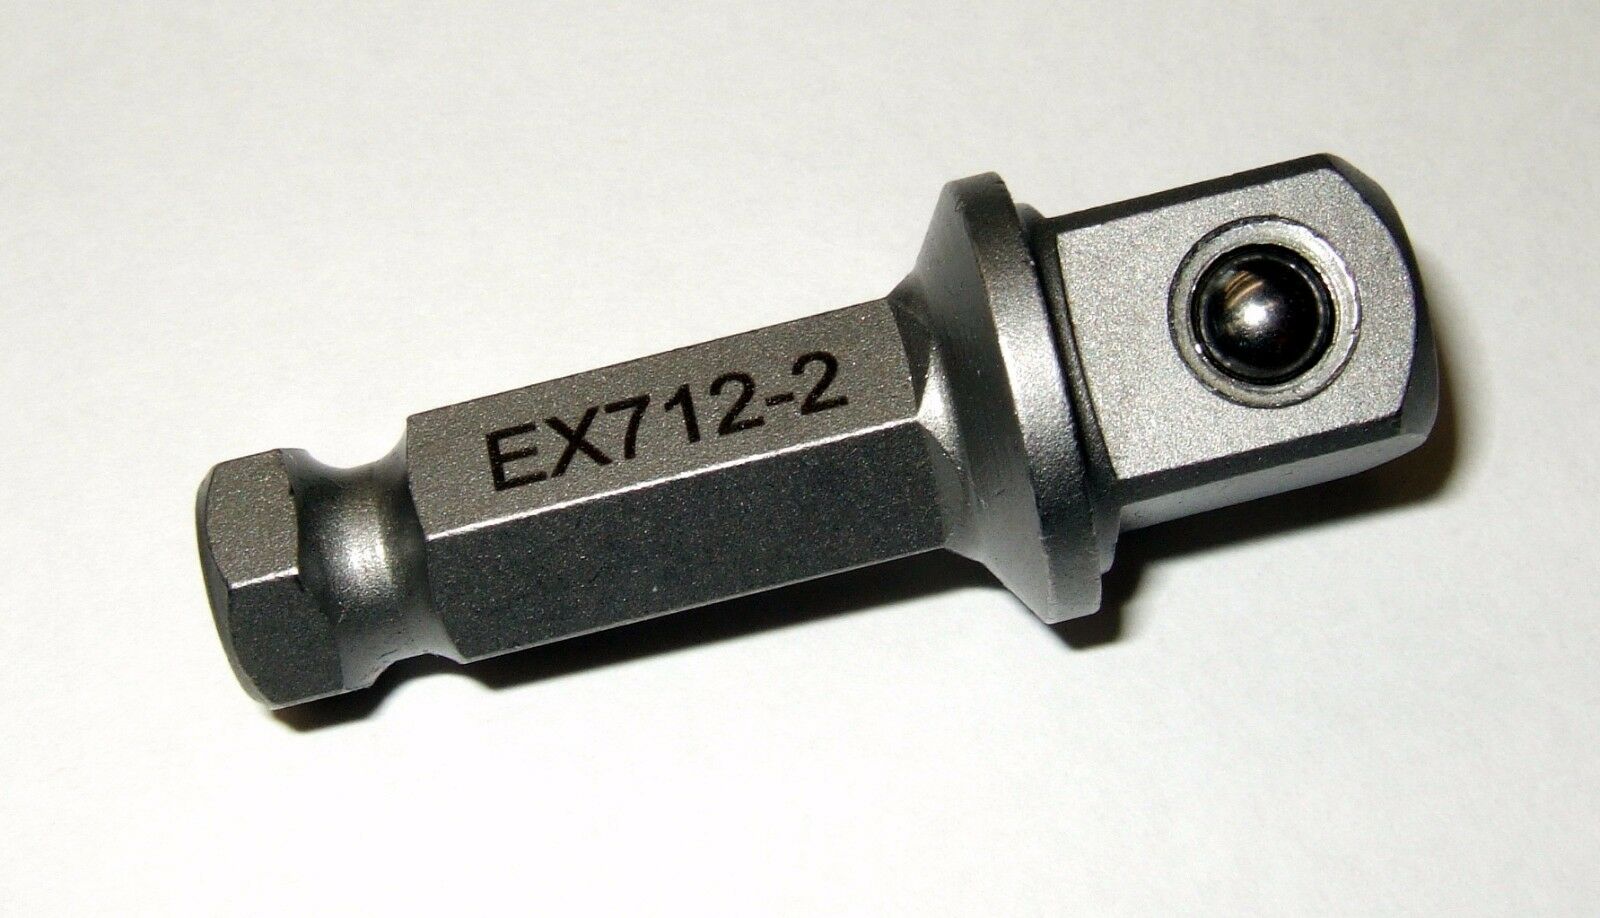 7/16 Hex To 1/2 Square Socket Adapter Drive Converter Spring Ball Retainer 2"